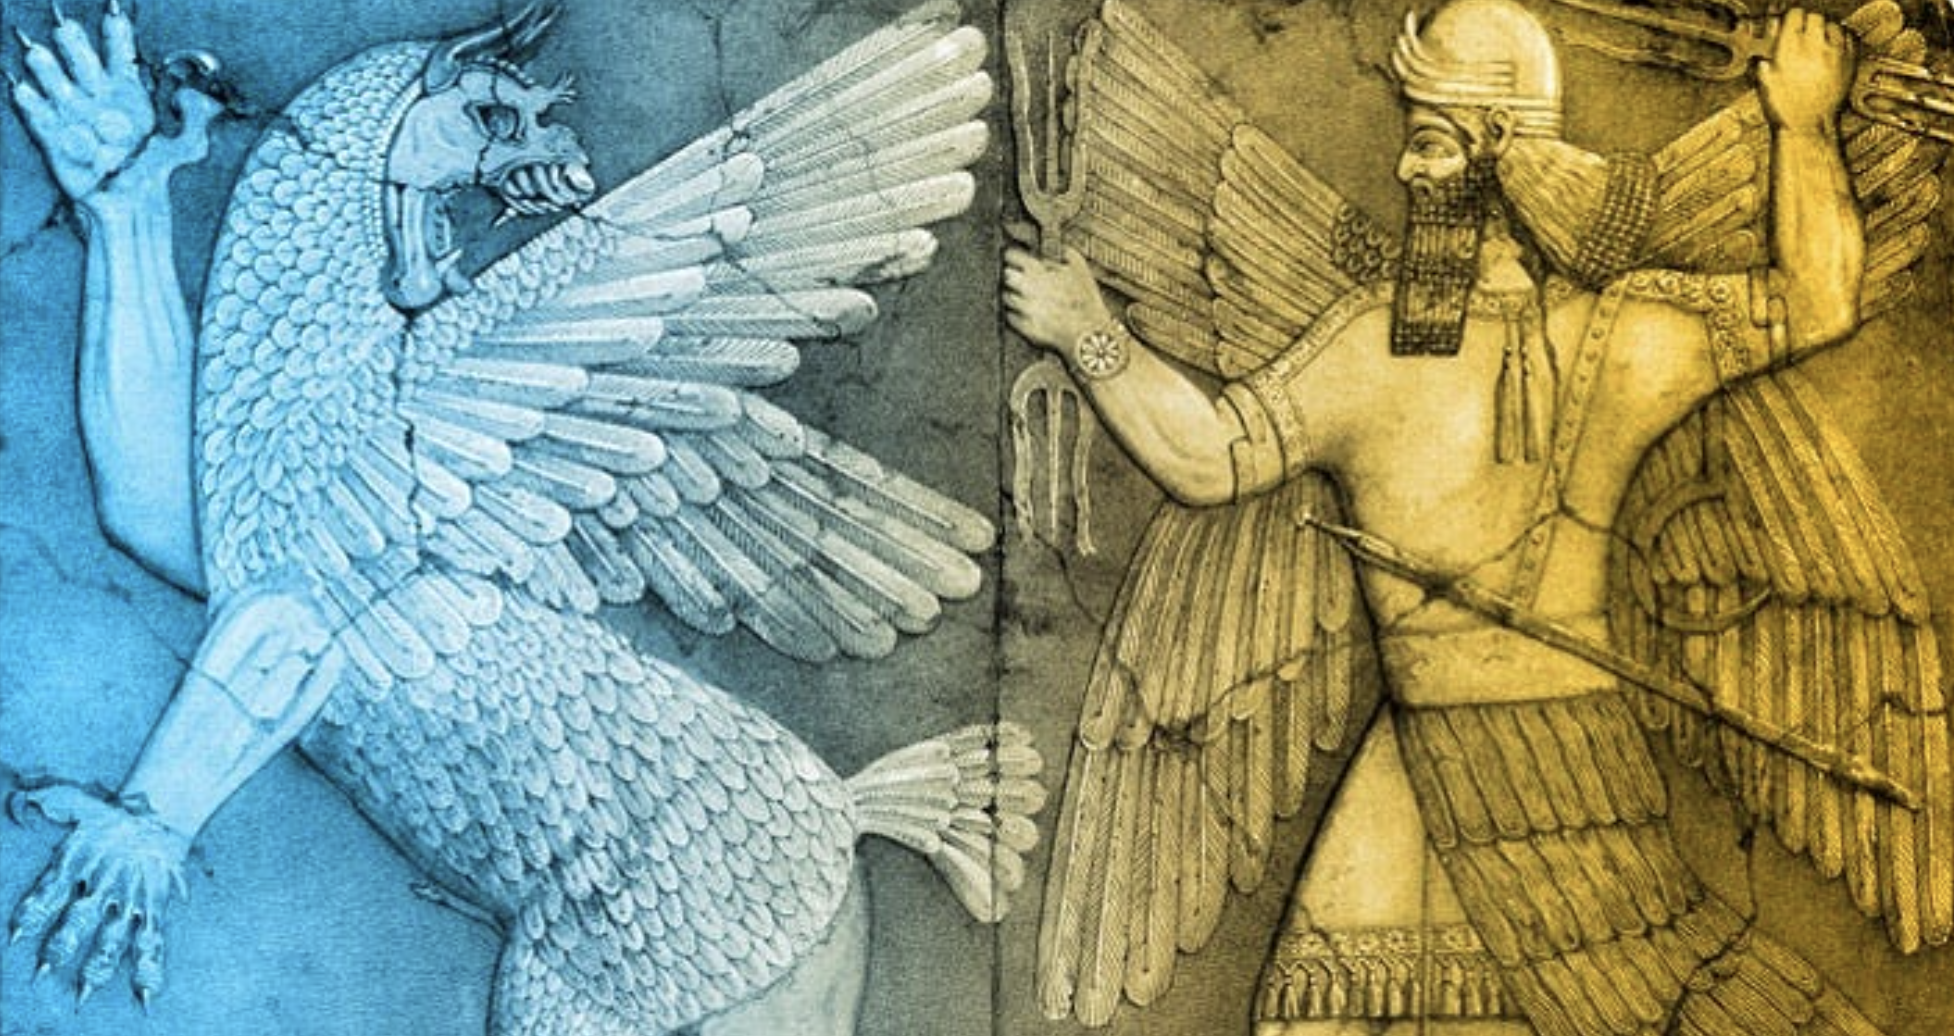 A depiction of ancient Sumerian myths and legends.